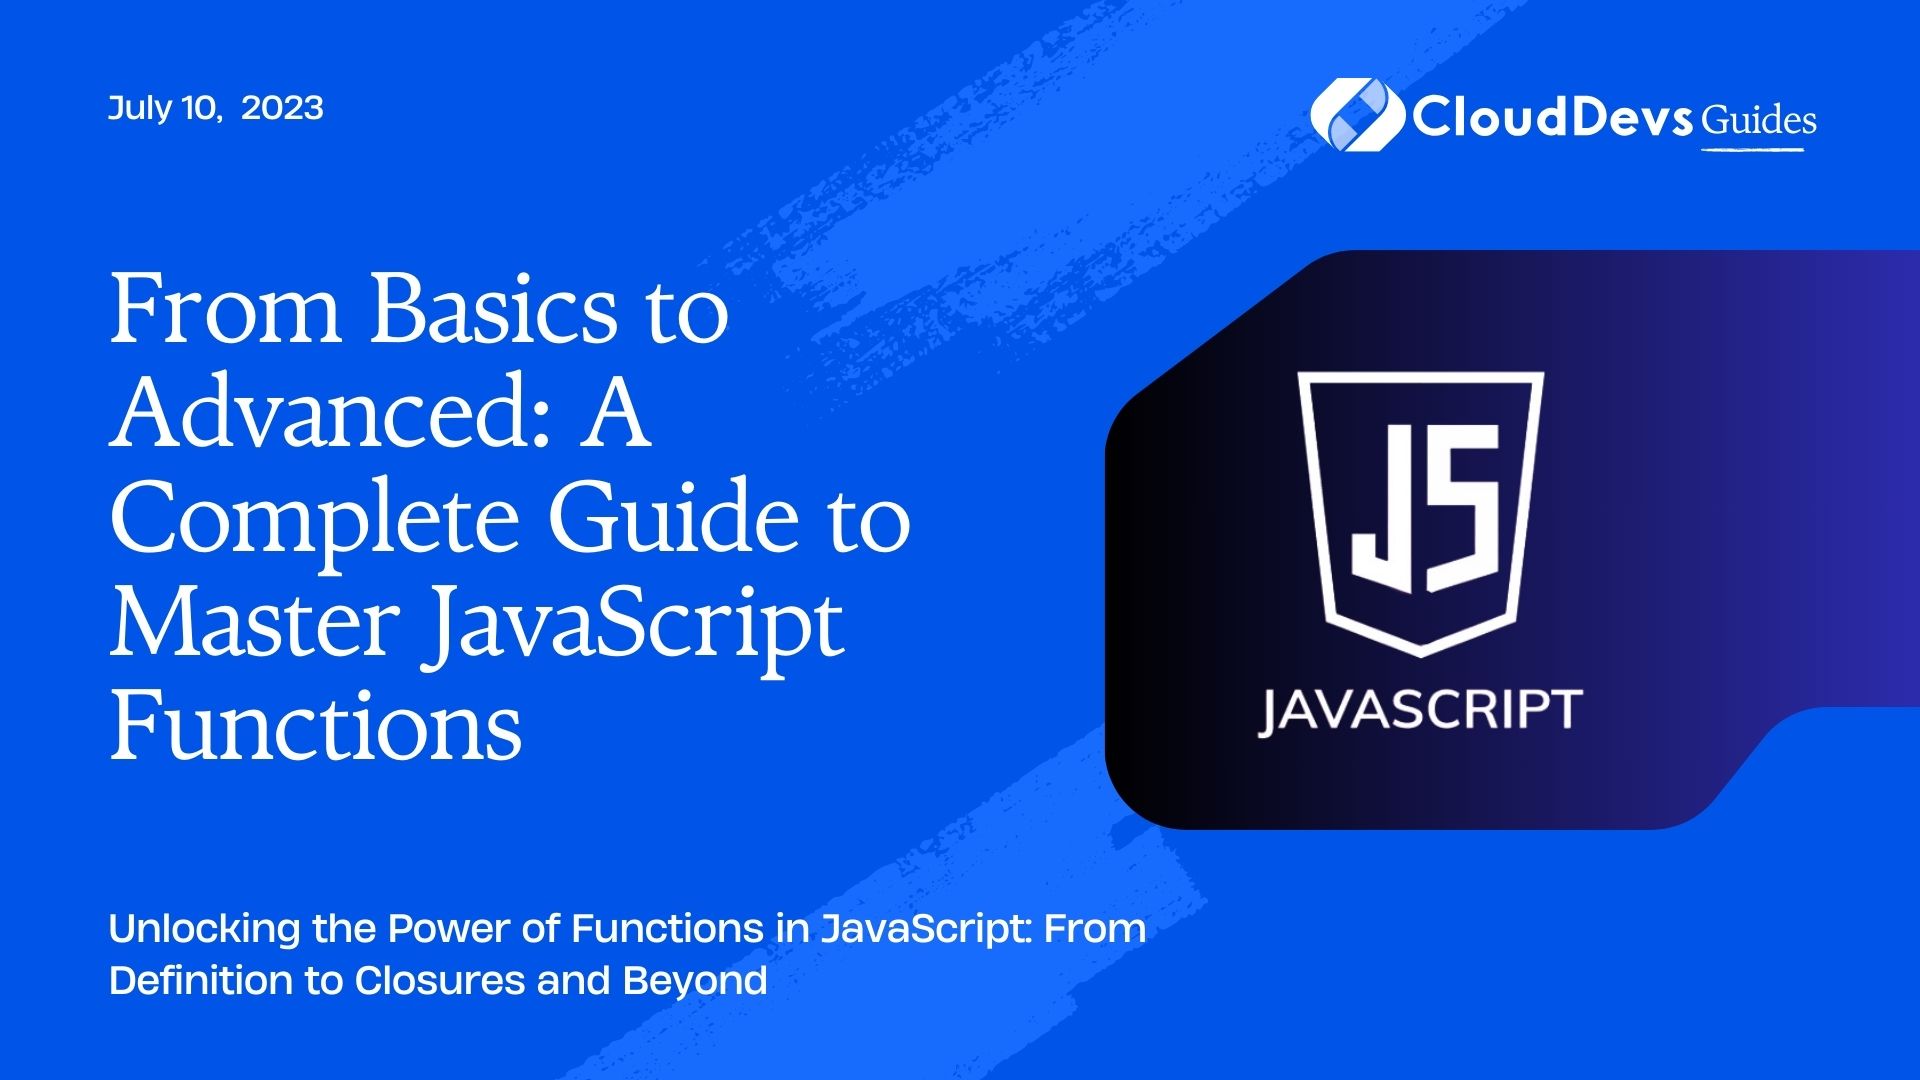 From Basics to Advanced: A Complete Guide to Master JavaScript Functions